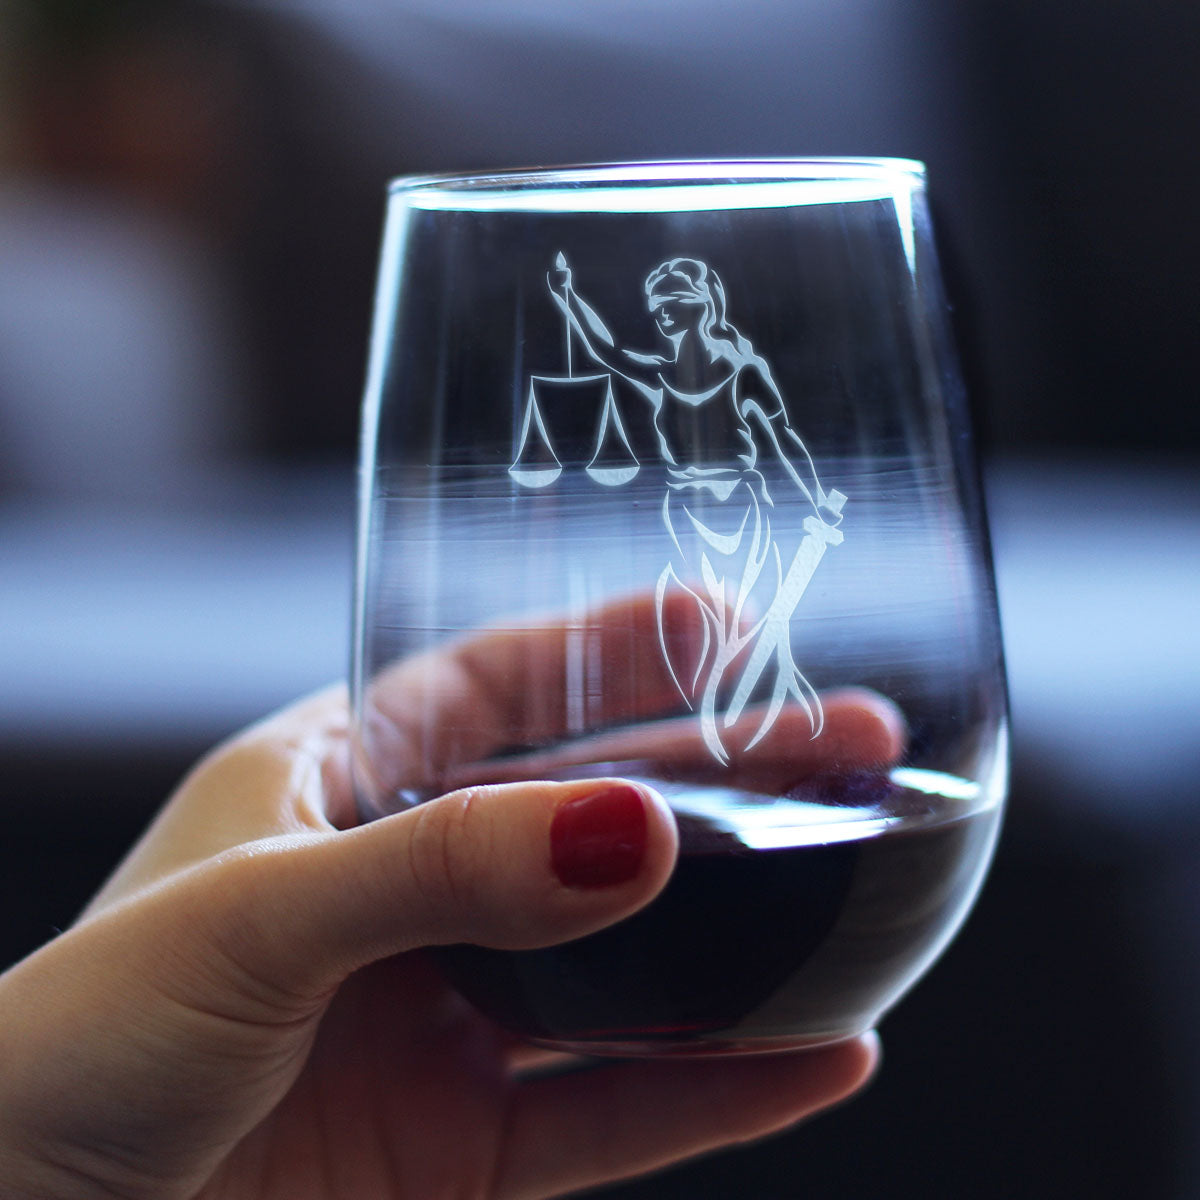 Lady Justice - Stemless Wine Glass - Lawyers and Attorneys Themed Gifts or Party Decor for Women and Men - Large 17 oz